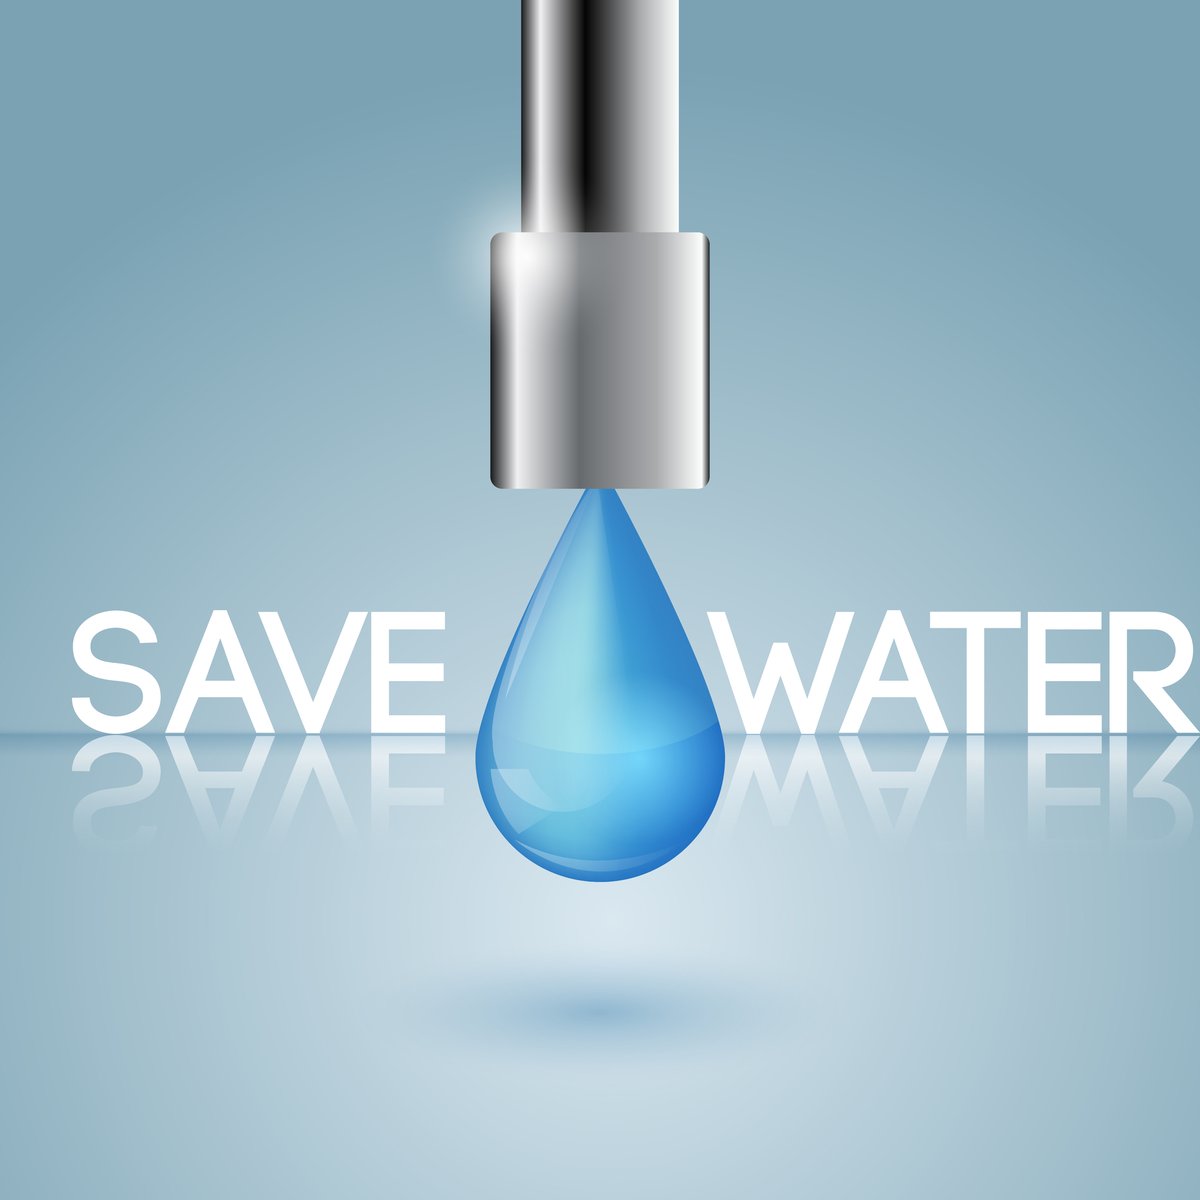 Did you know the average person wastes gallons of water every day? 😱  Let's change that together!
Short showers 🚿
Fix leaky faucets 🔧
Full laundry loads 🧺
Water lawn less 🌳
Small changes make a difference!🌎 #WaterConservation #SaveWater #EveryDropCounts #BeWaterWise